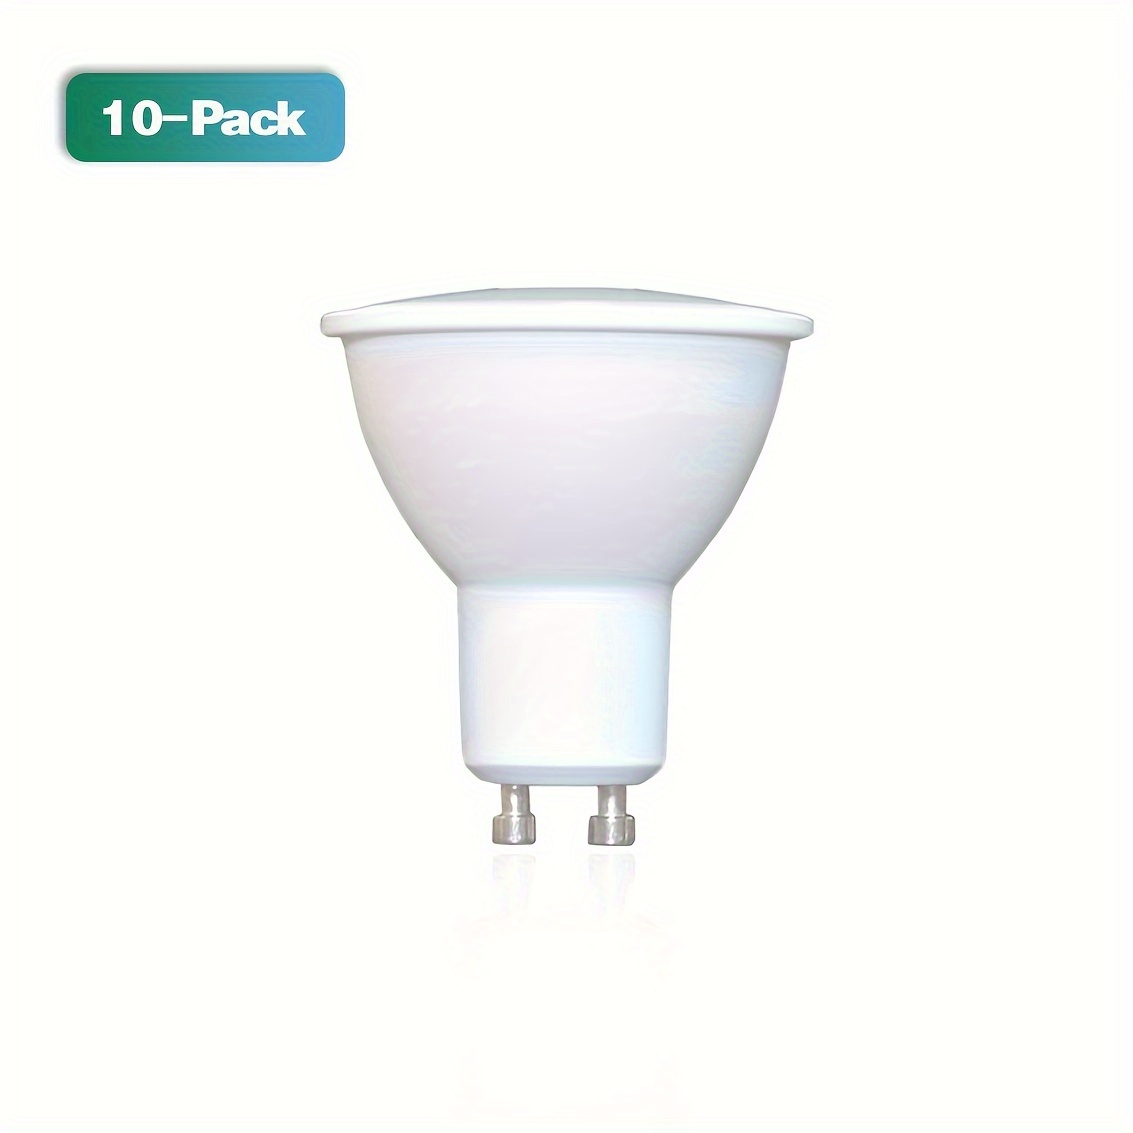 

A pack of 10 bulbs with MR16 LED technology, 6W power (equivalent to 50W), GU10 base, 480lm brightness, CRI80+, AC220-240V, 3000-6500K color temperature, ideal for home and office, energy-efficient.